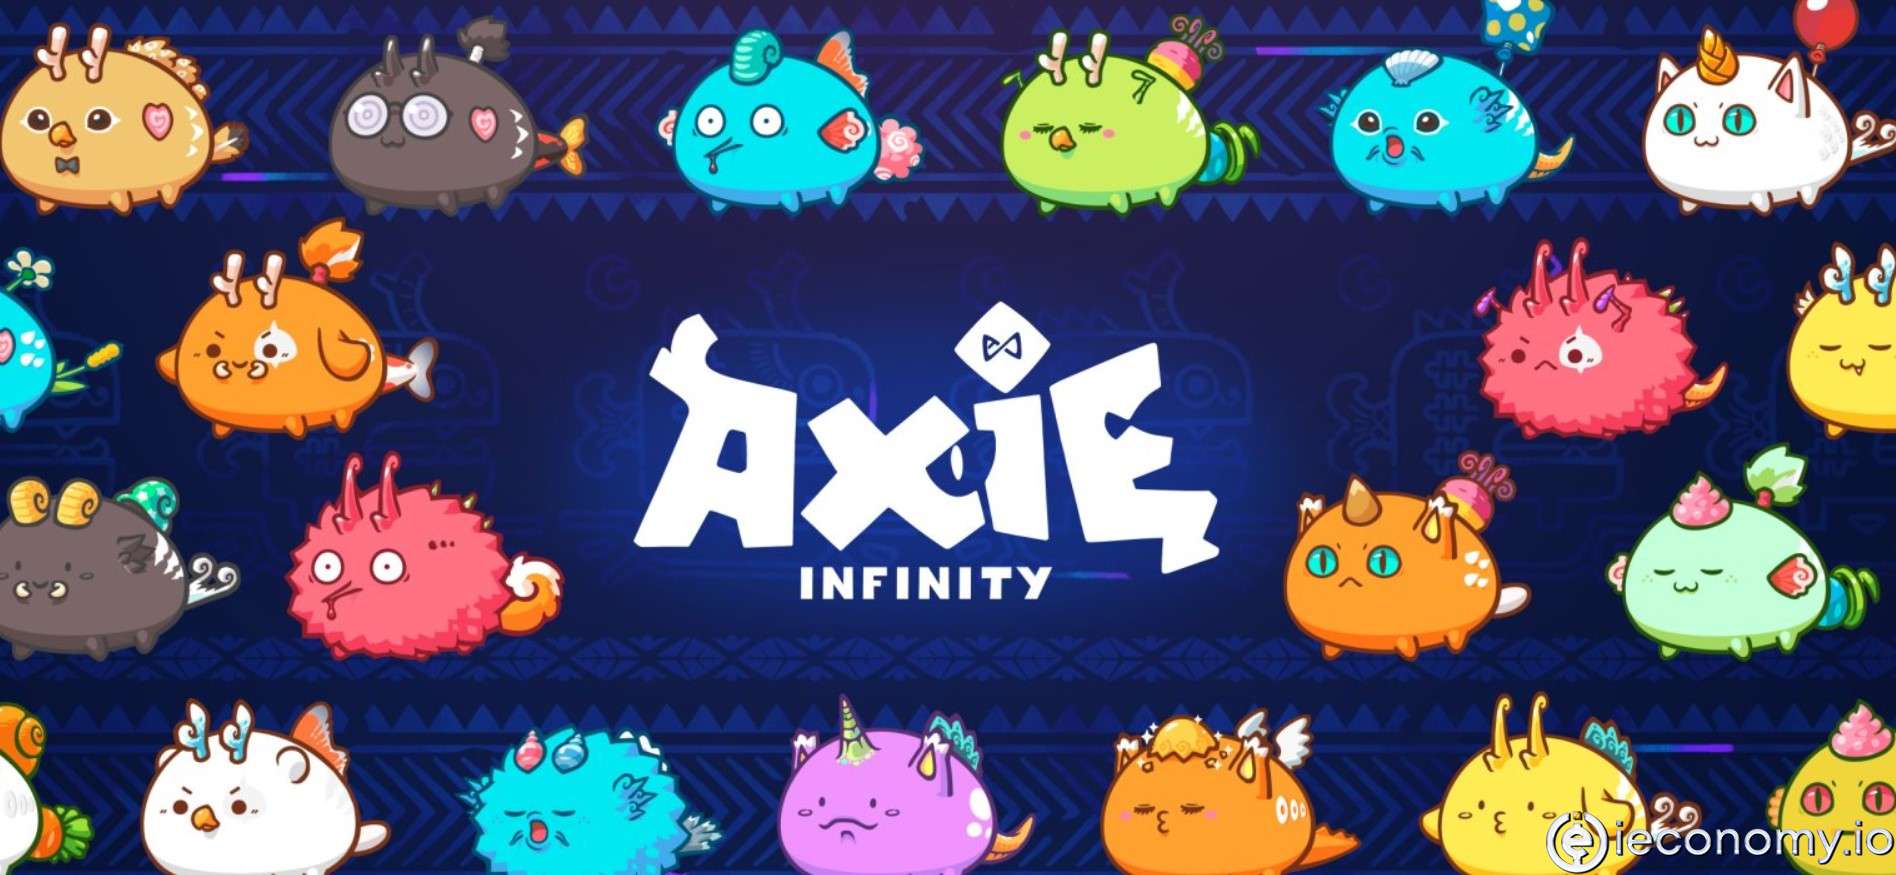 Virtual Land in Axie Infinity Sold for $2.4 Million